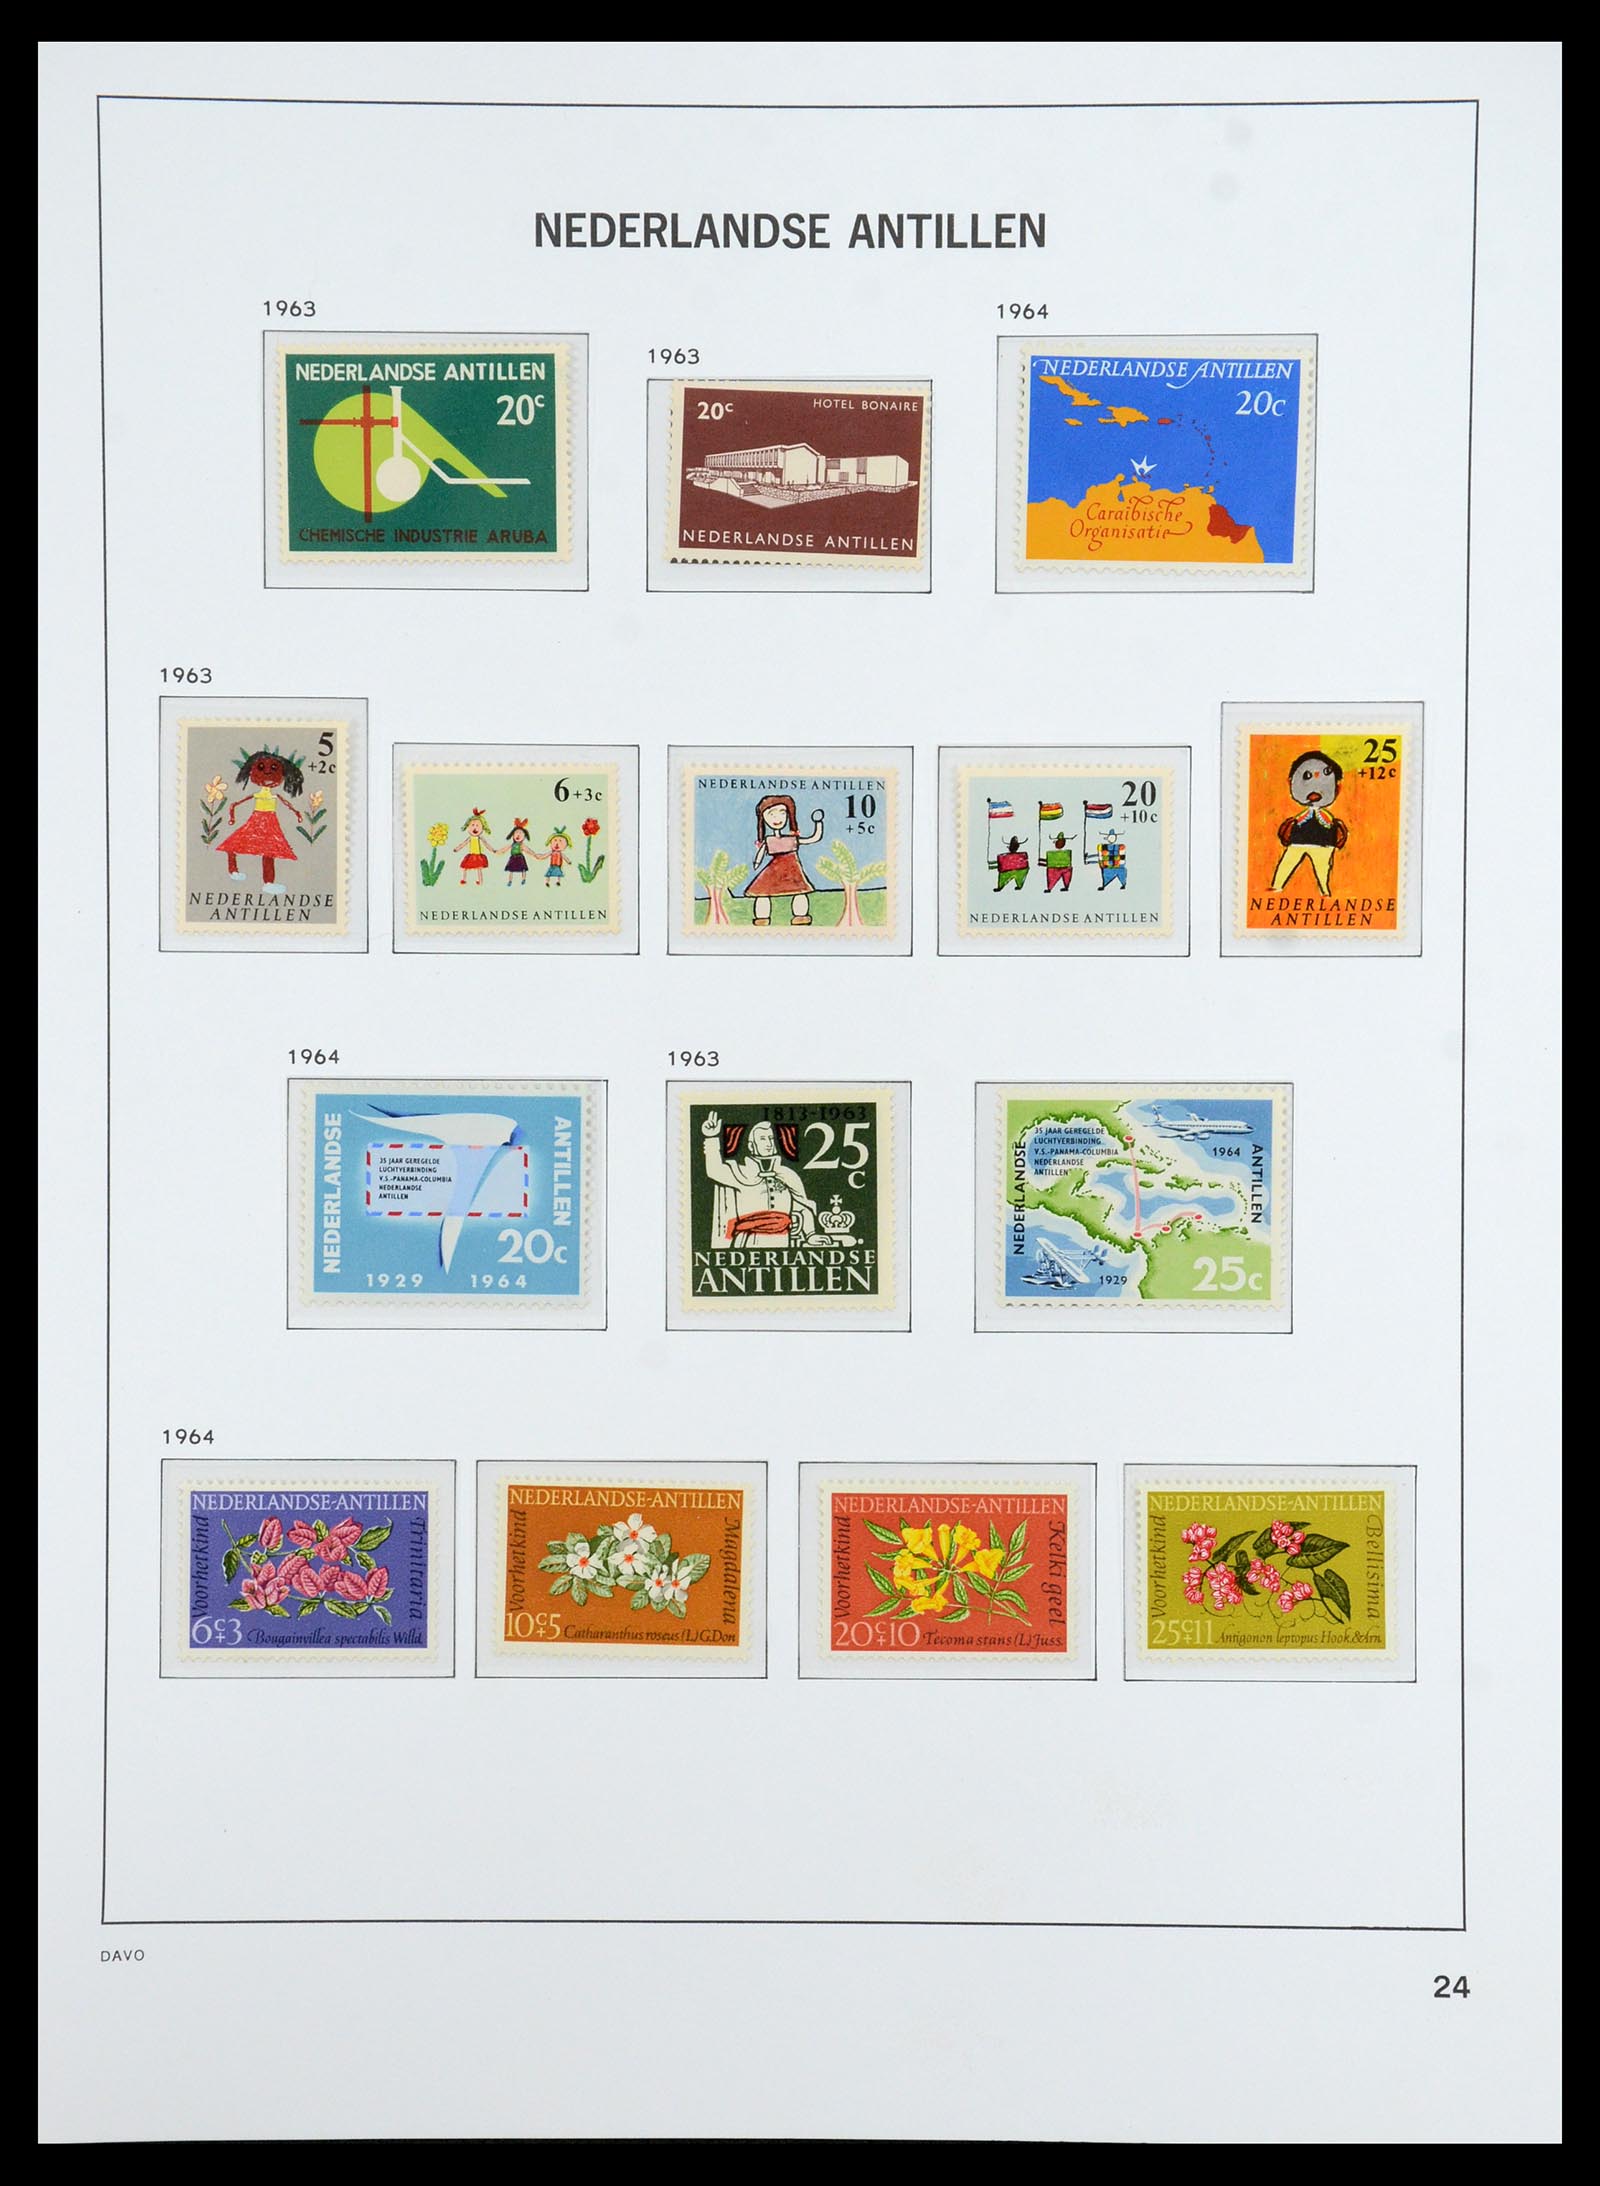 36398 073 - Stamp collection 36398 Dutch territories 1864-1975.